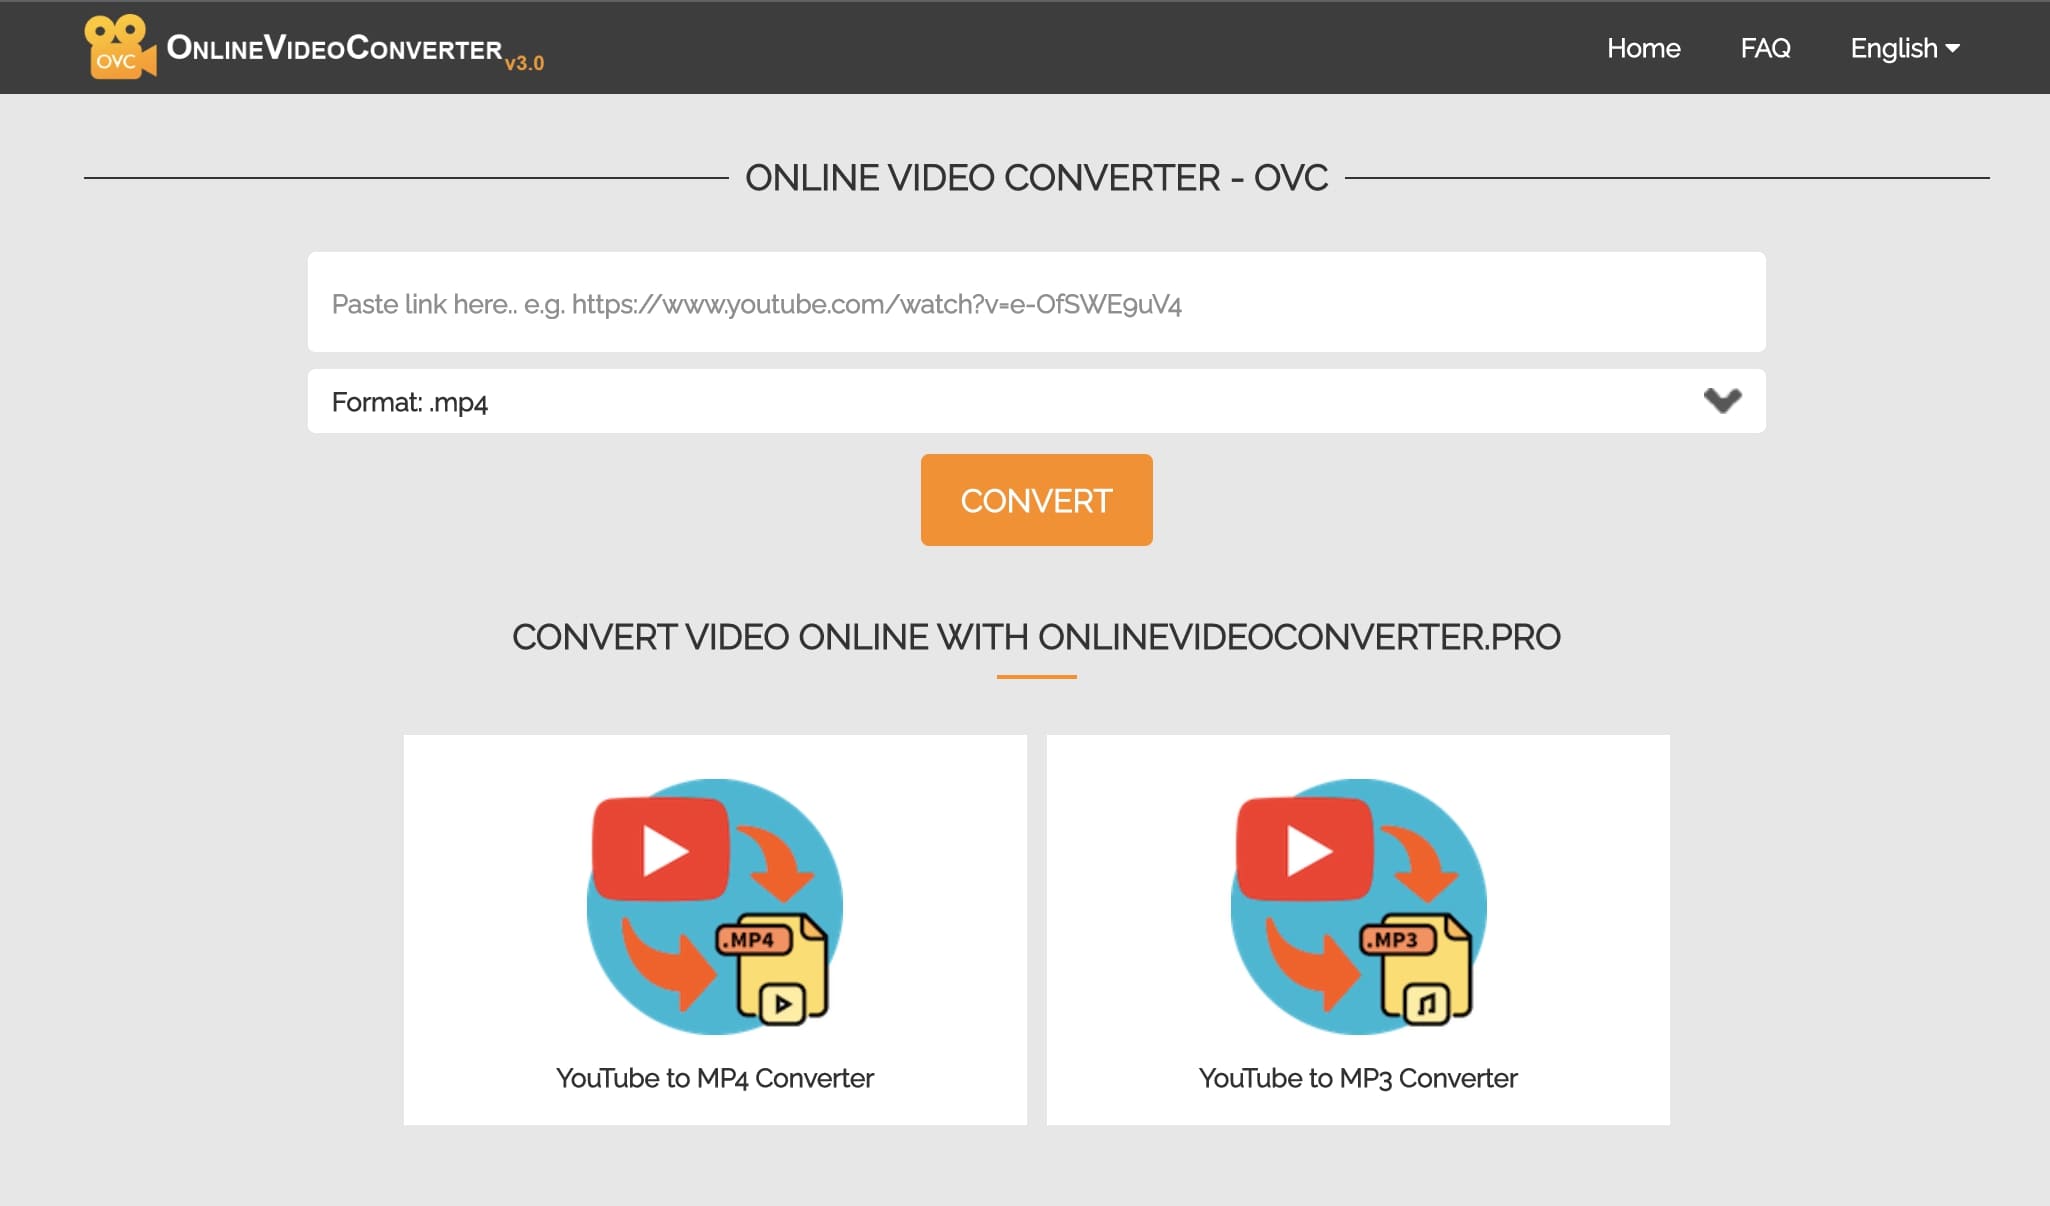   online-video-to-mp4-converter-OVC  